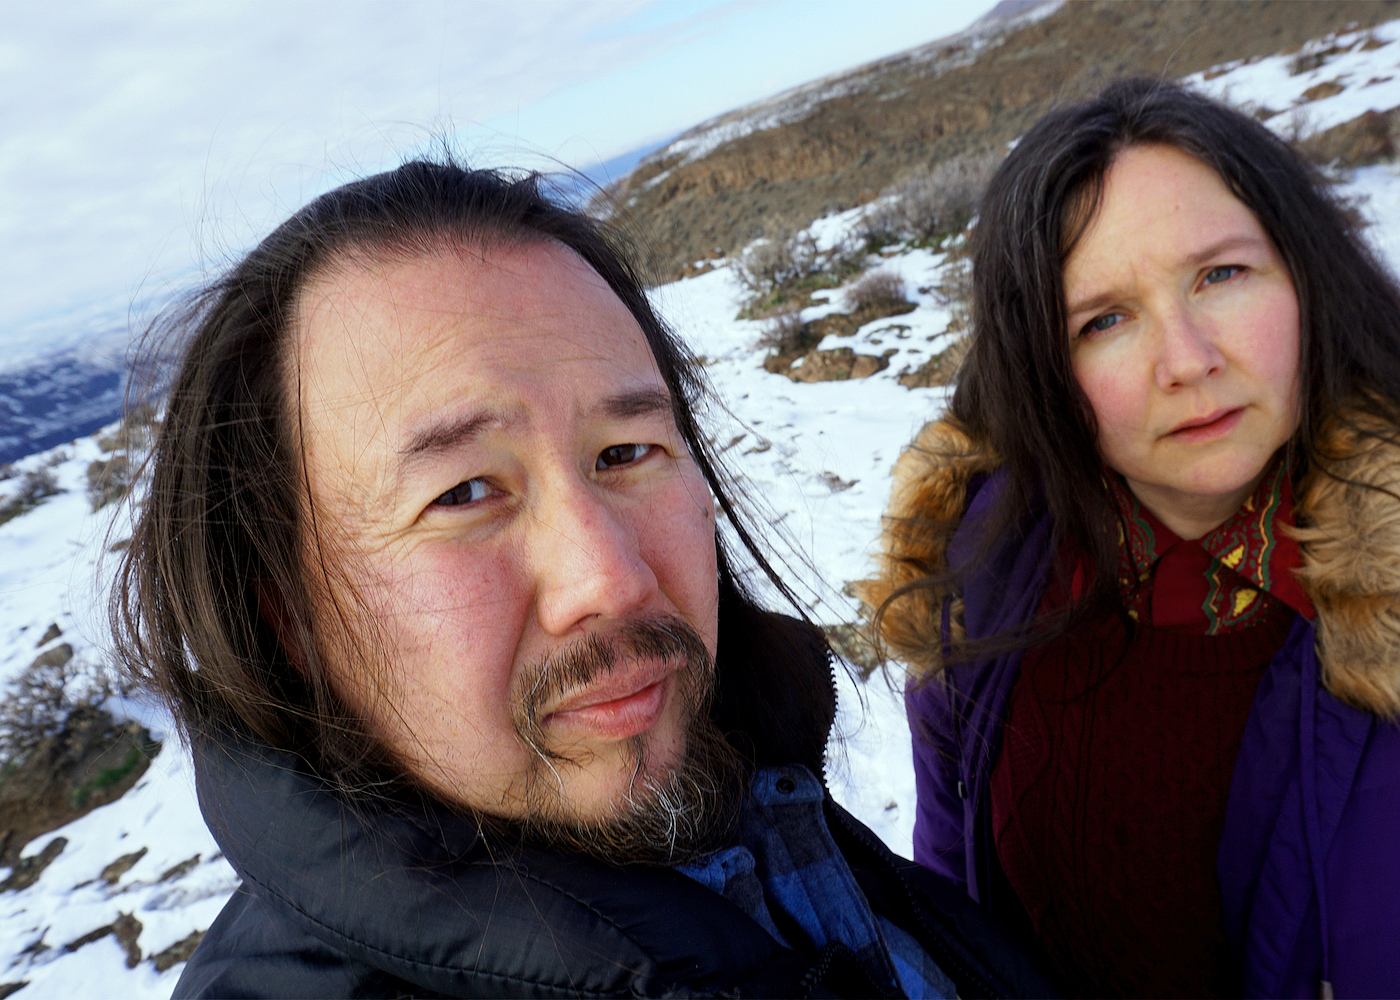 A selfie of Eyvind Kang and Jessika Kenney on a clear cold day. They wear winter jackets, and the ground around them is covered in snow.